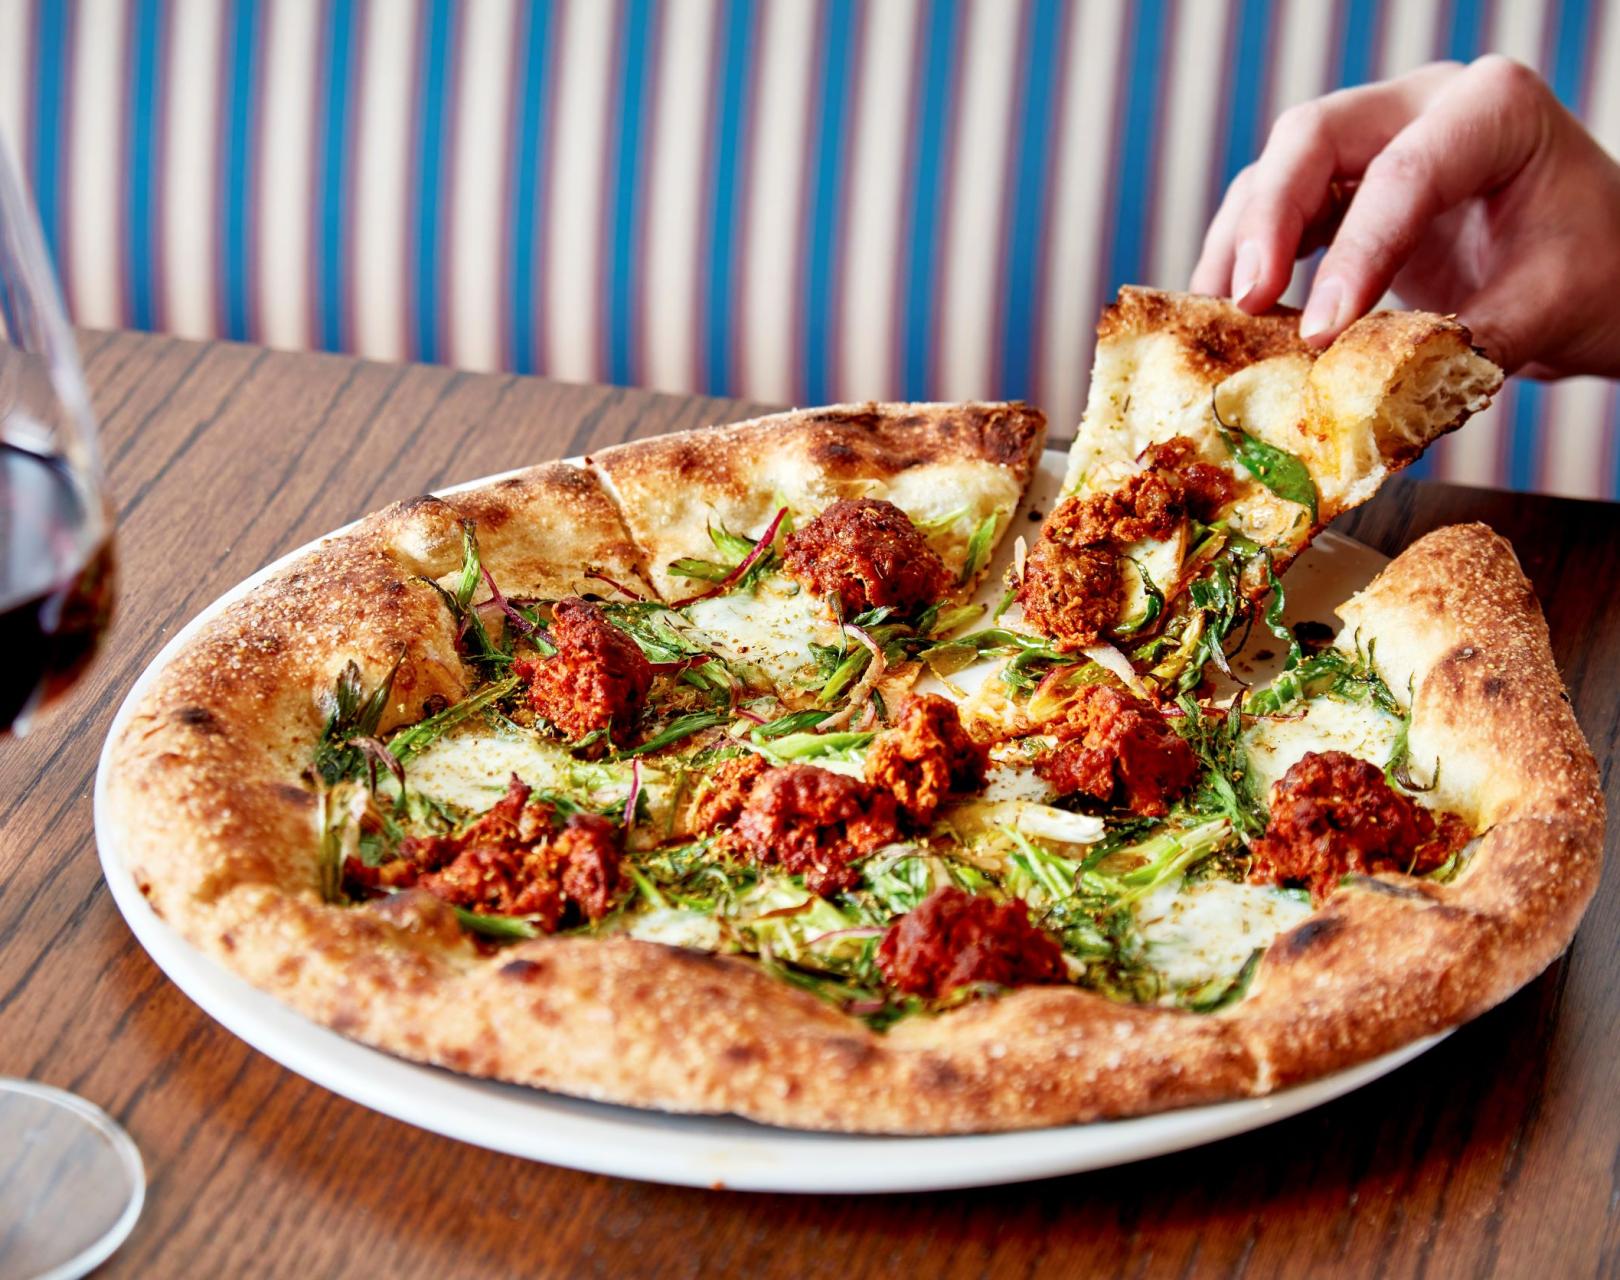 Where To Eat World-Class Pizza In London